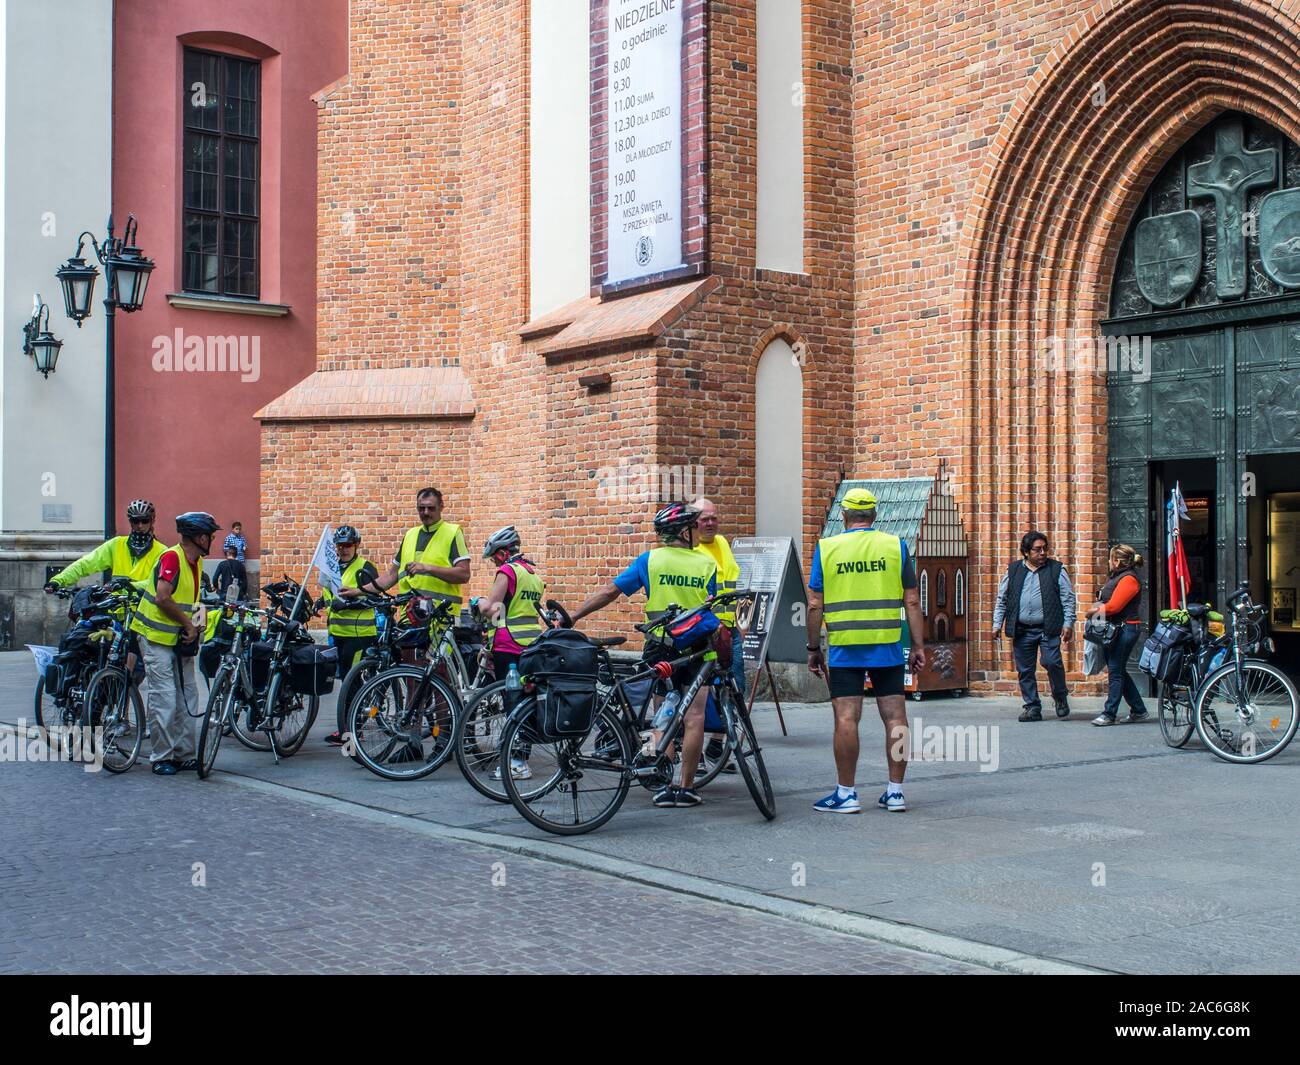 Warsaw, Poland - June 02, 2017: Cyclists in yellow vests at Old Town Square (Rynek Stare Miasto) during the summer time, UNESCO World Heritage Site. Stock Photo